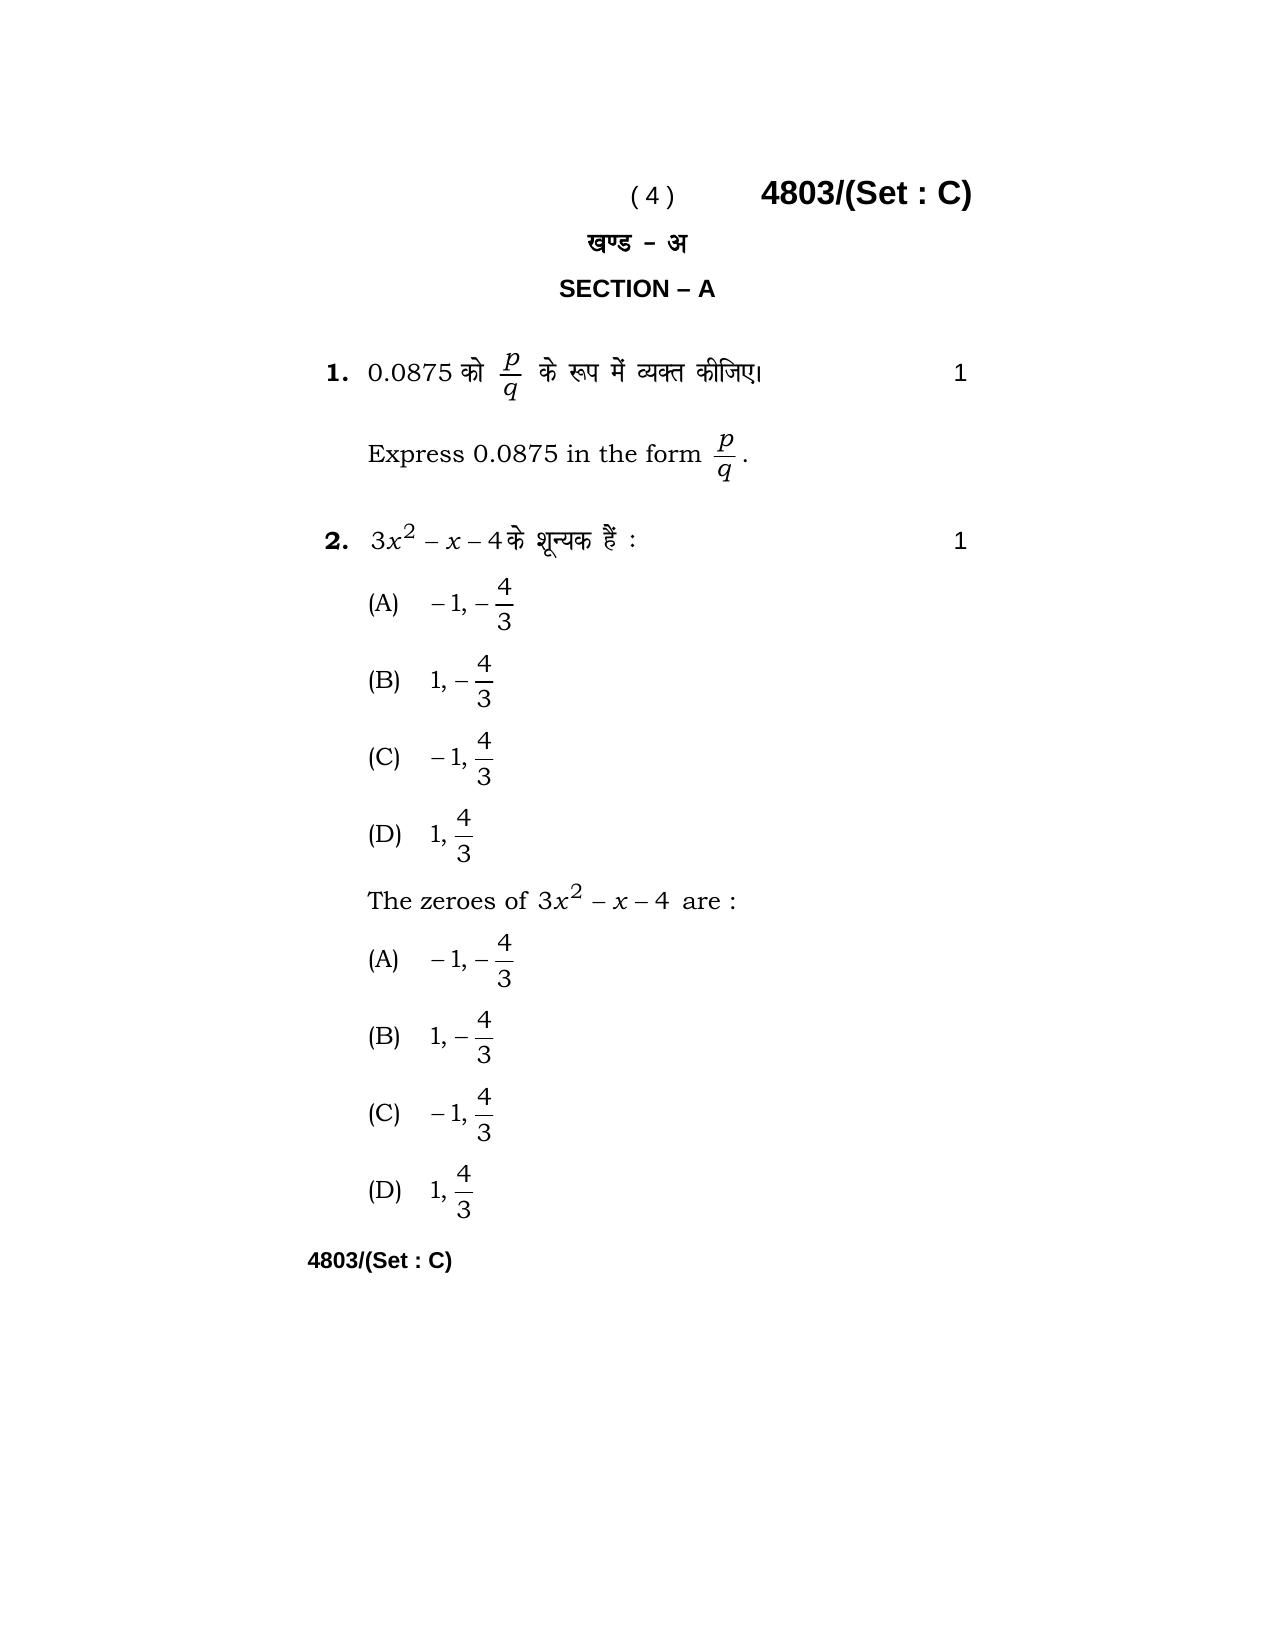 Haryana Board HBSE Class 10 Mathematics 2020 Question Paper - Page 36